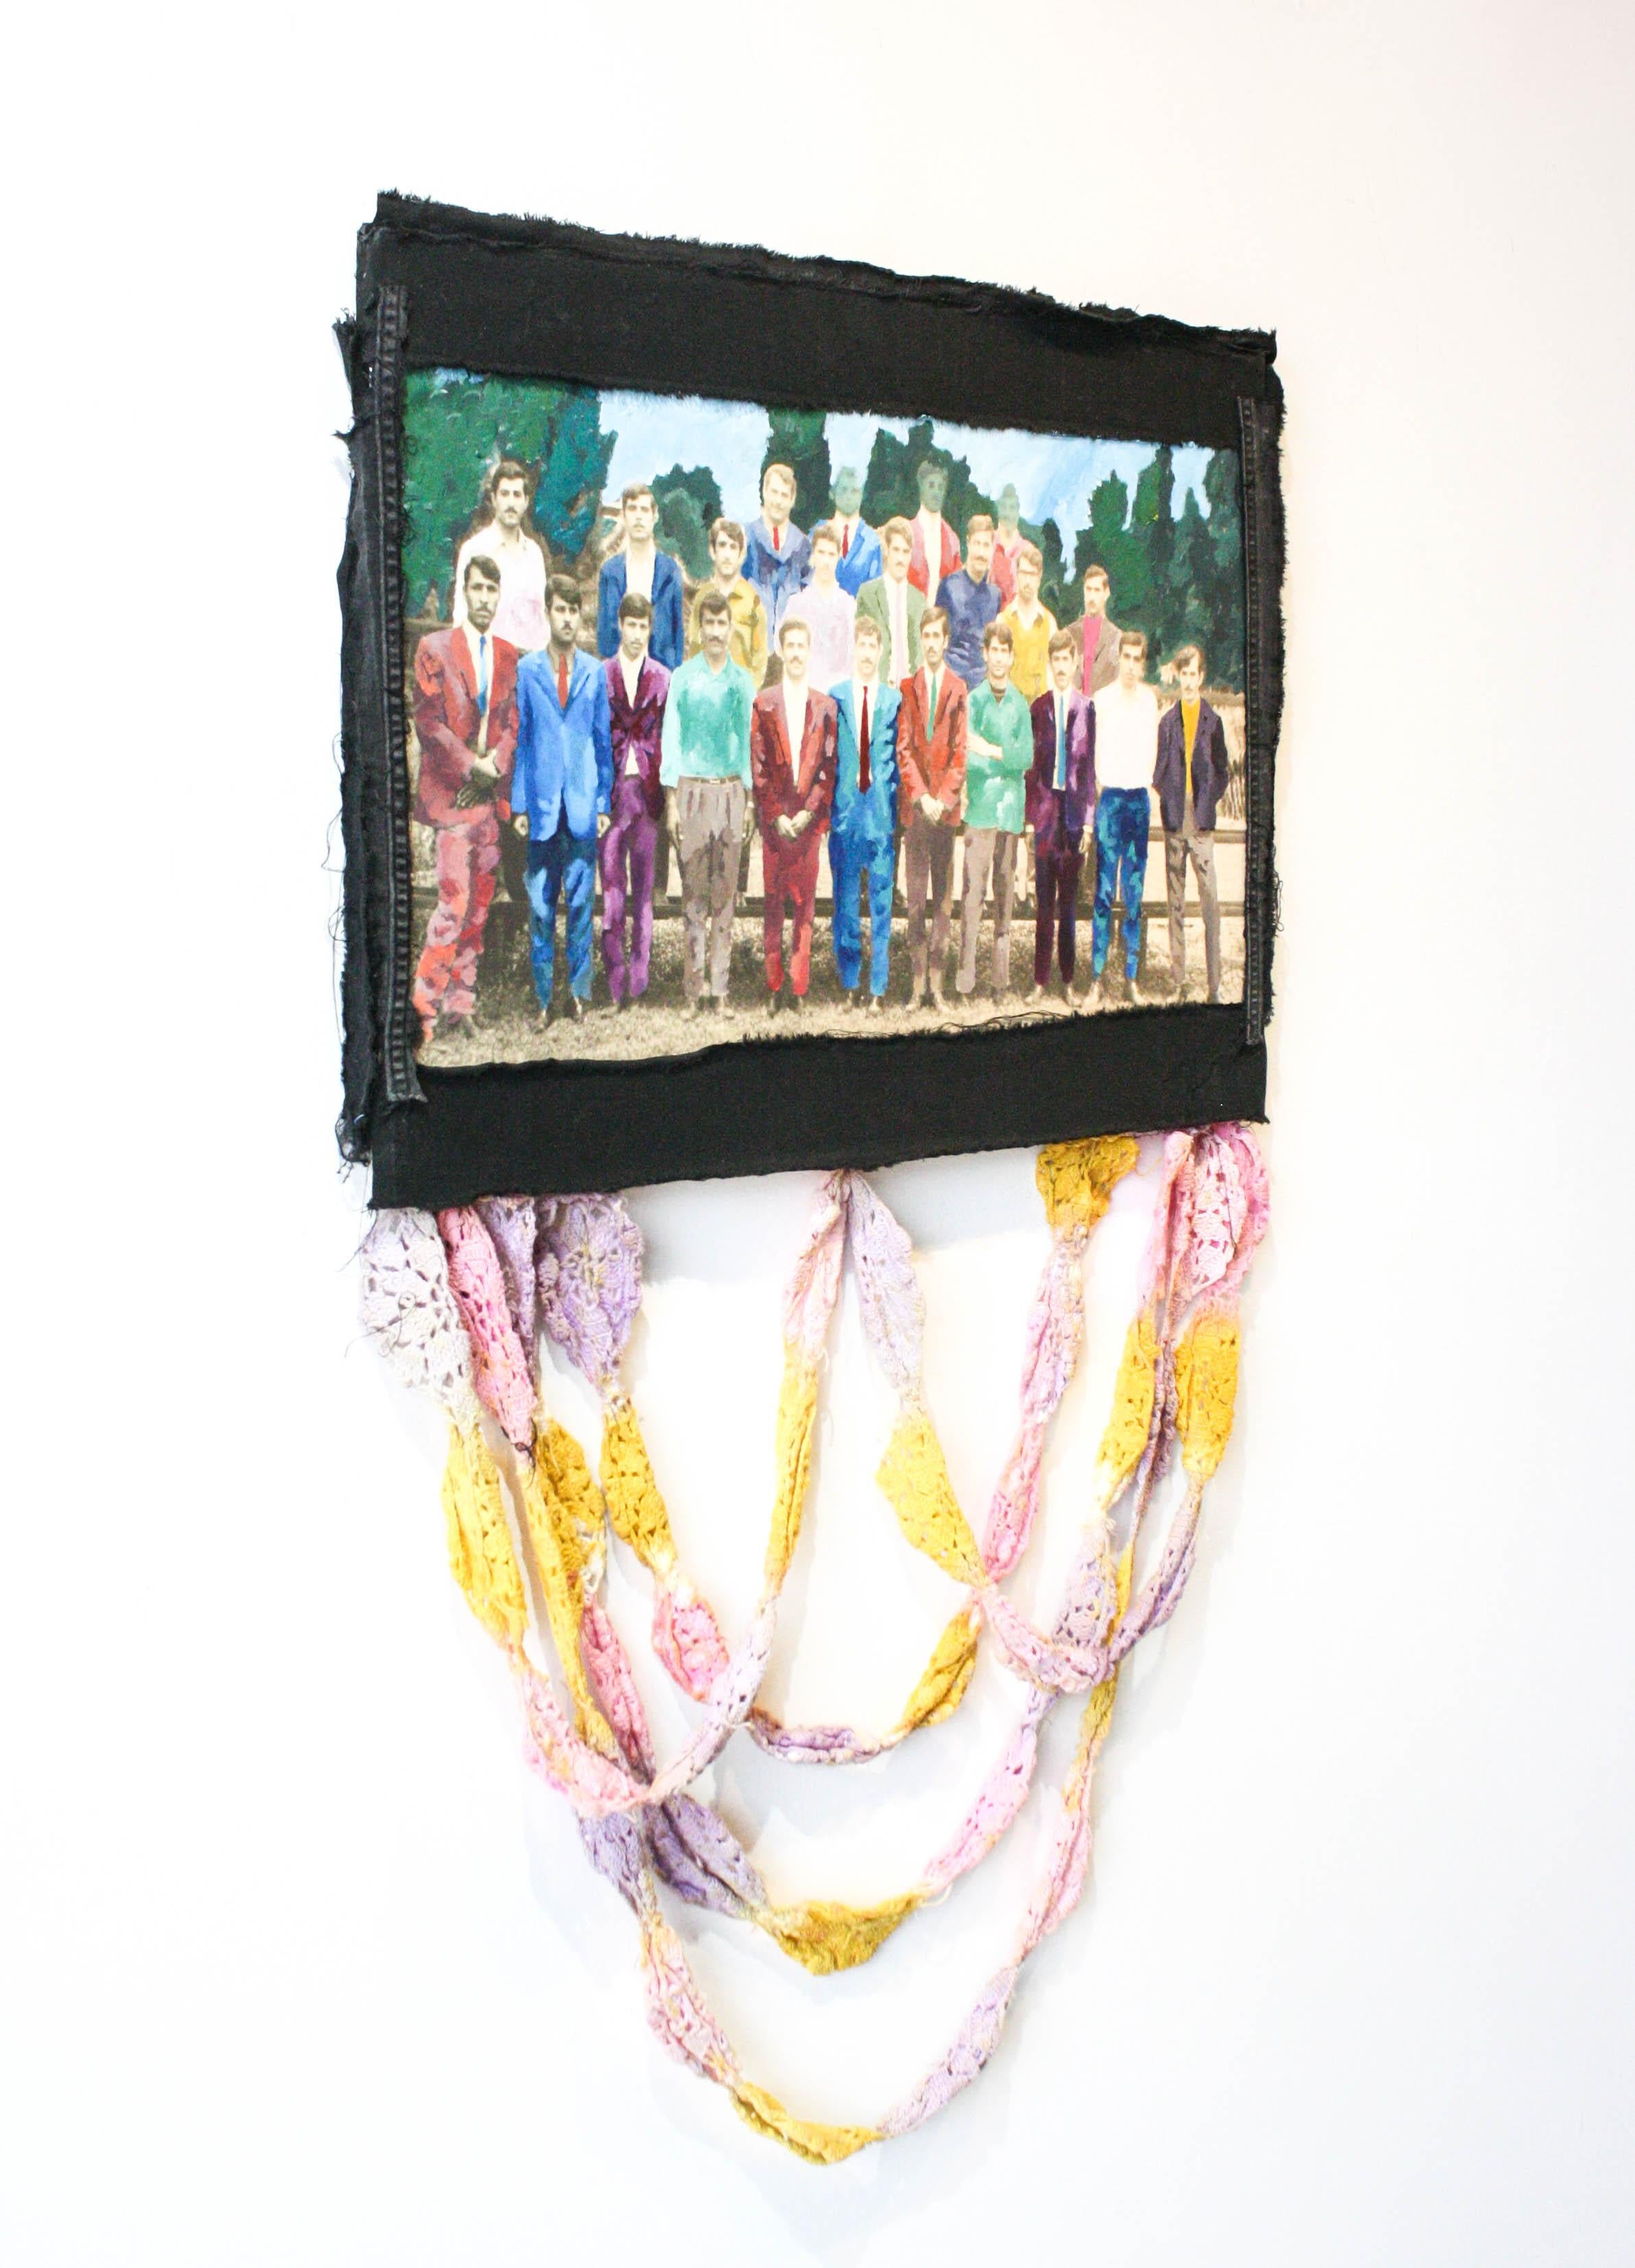 This mixed media piece has fabric draped down from an image of several people in rows. 

Artist Statement: 

I employ collage to reflect on the fragmented state of diasporic living in a stateless community. My making process involves gathering and